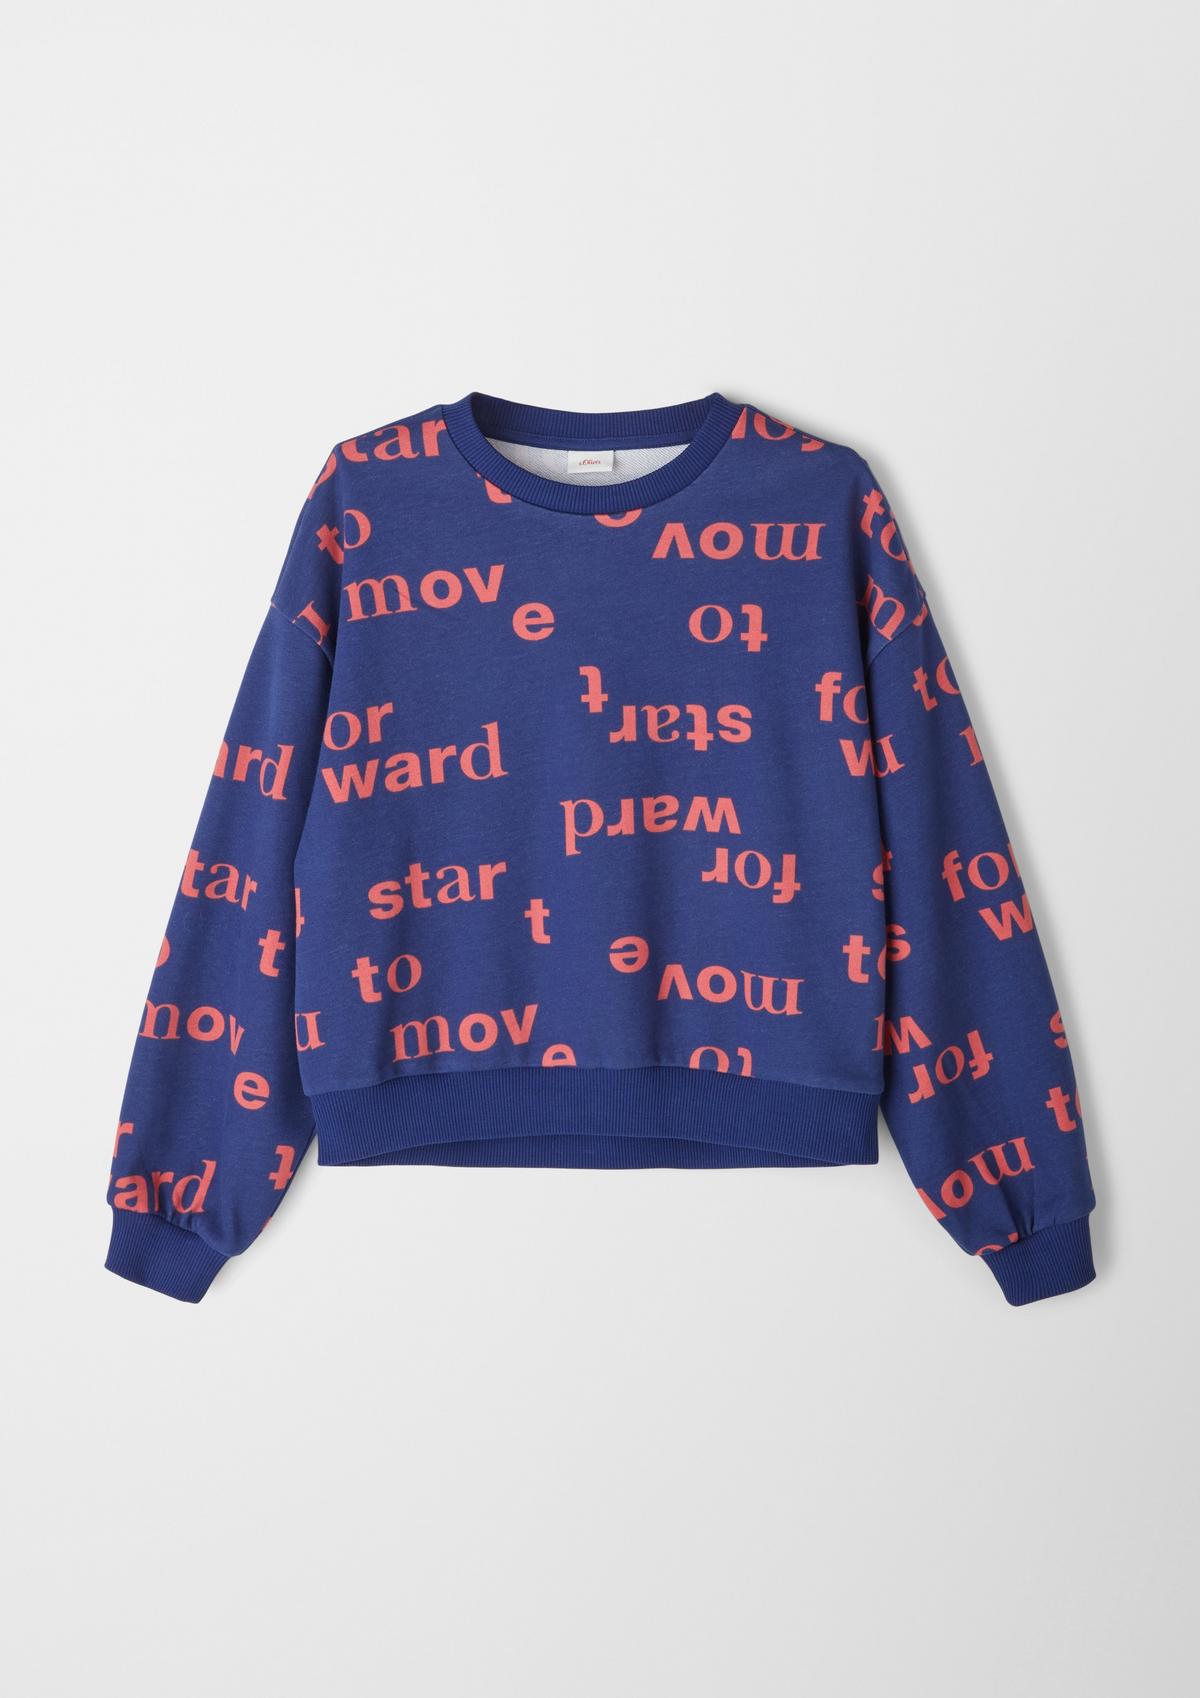 Sweatshirts and knitwear and for girls teens